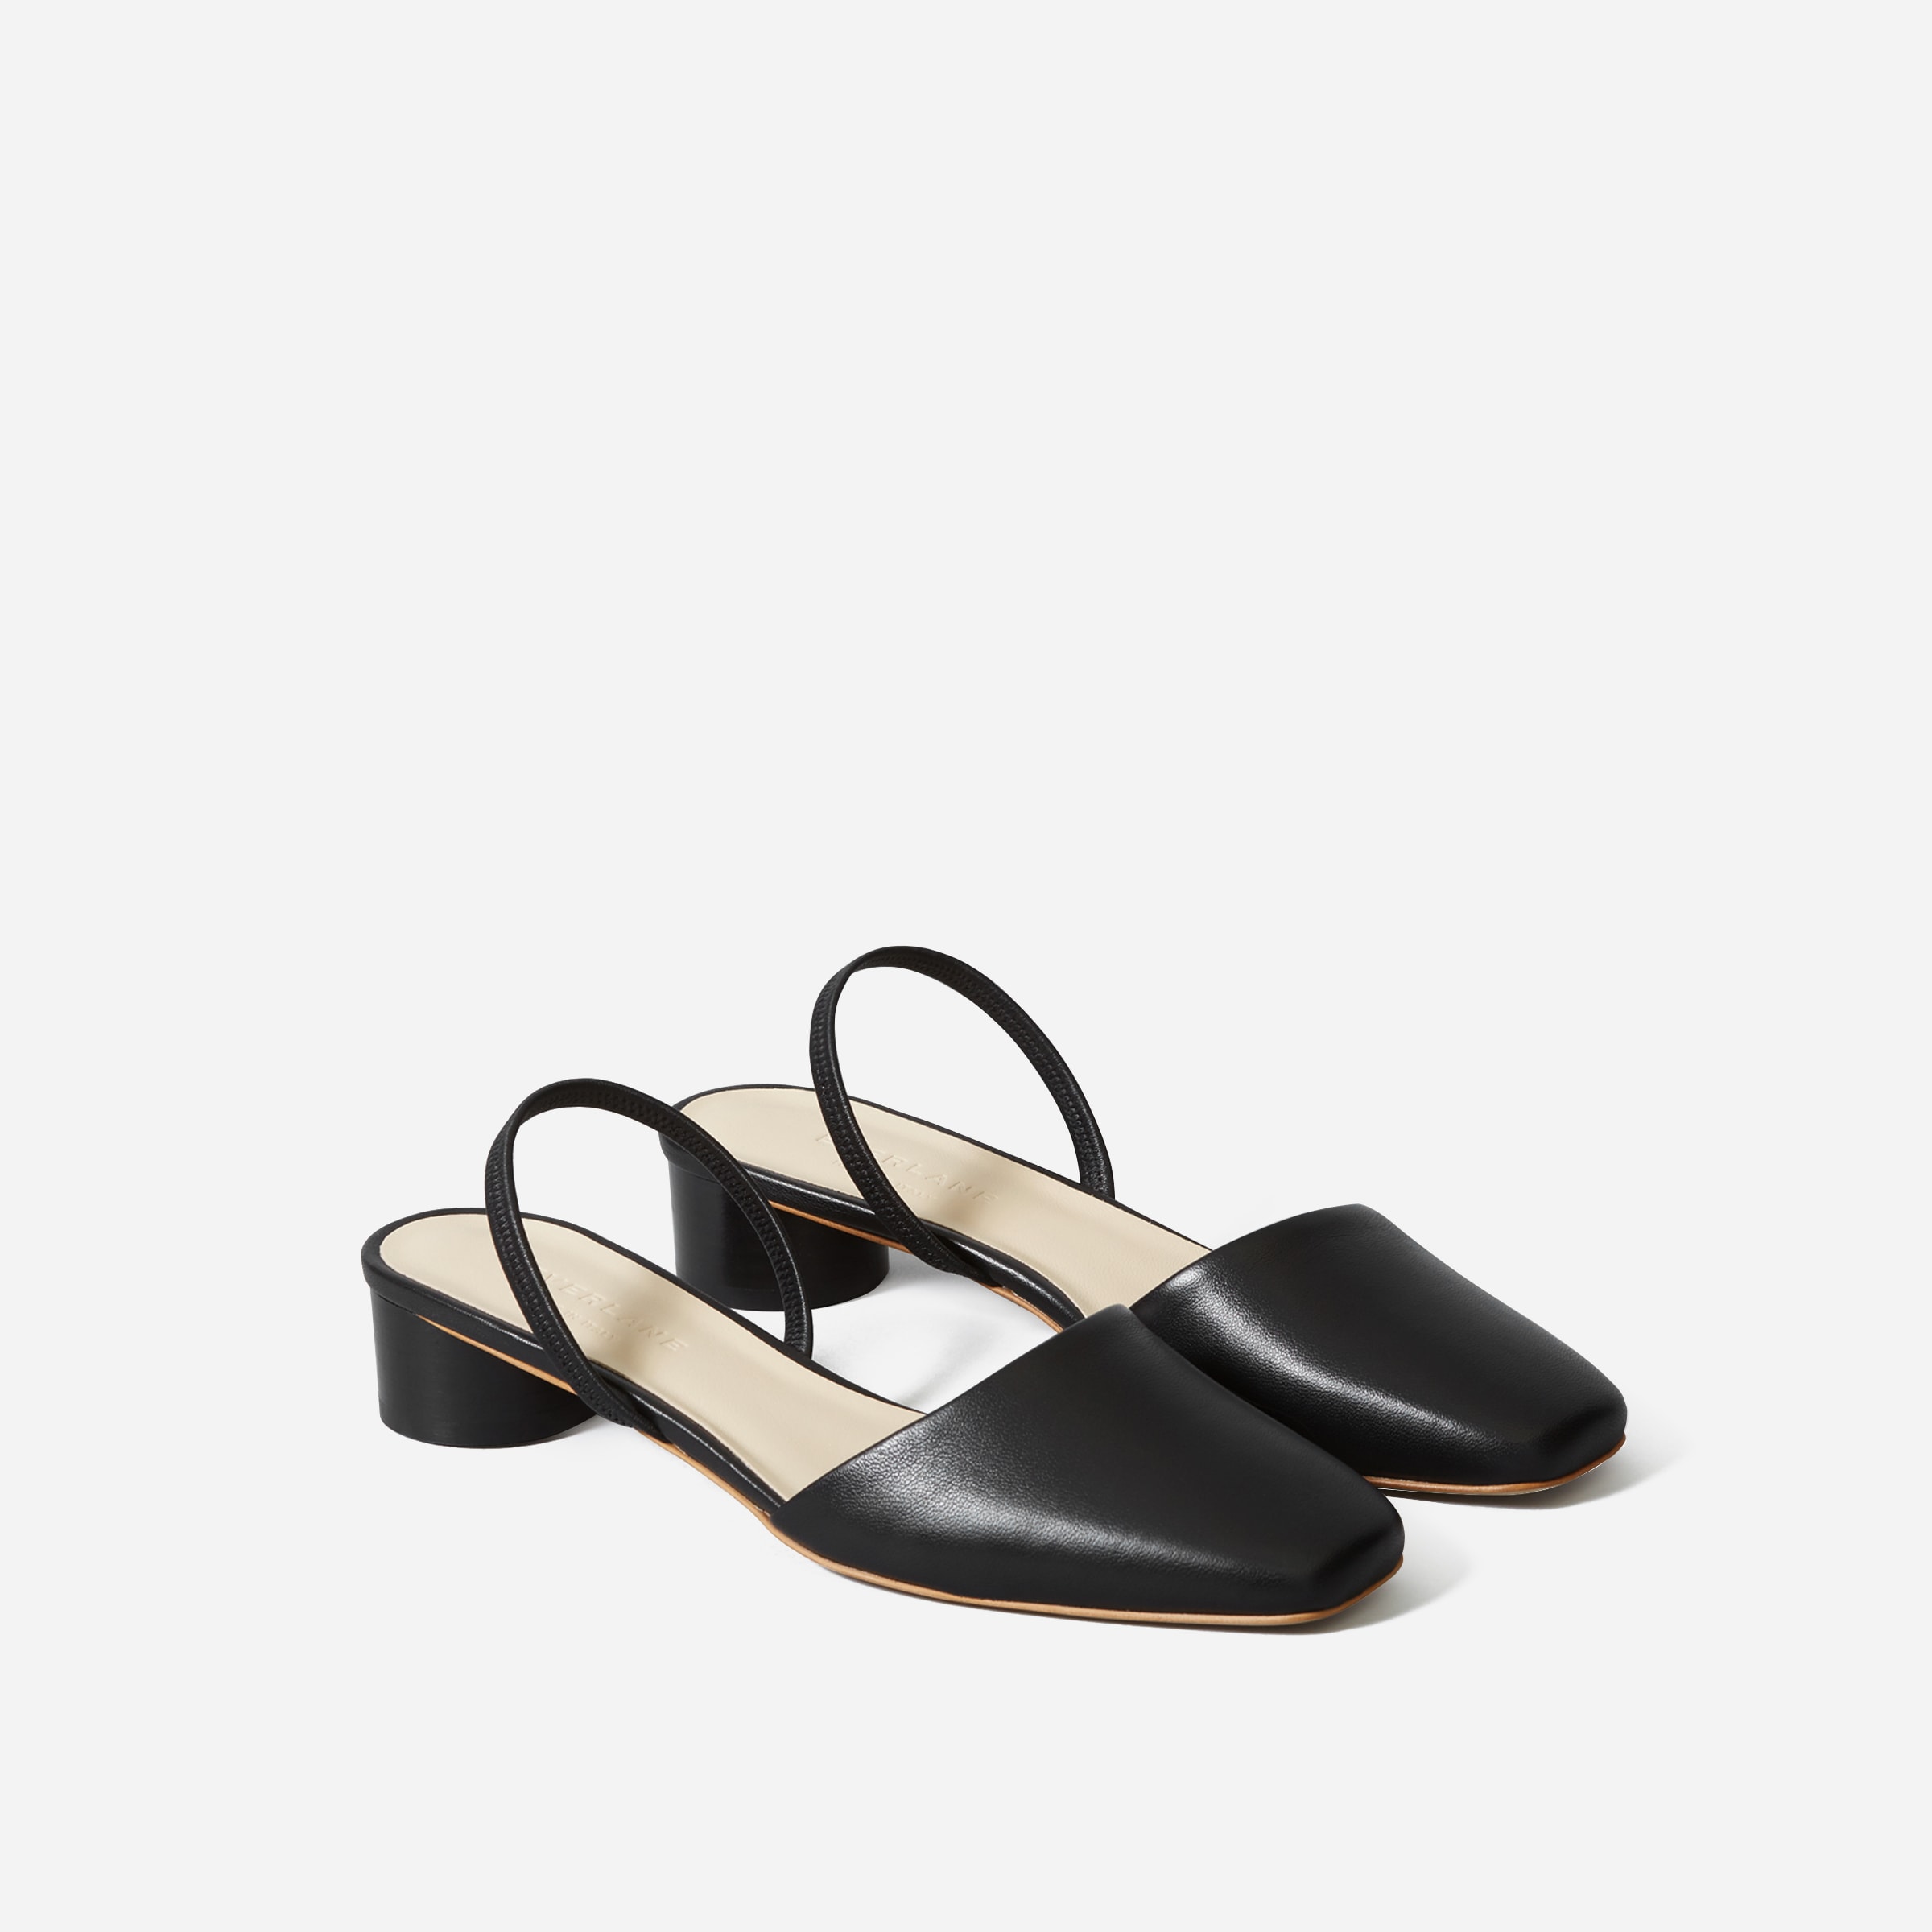 The Tapered Square Toe Slingback